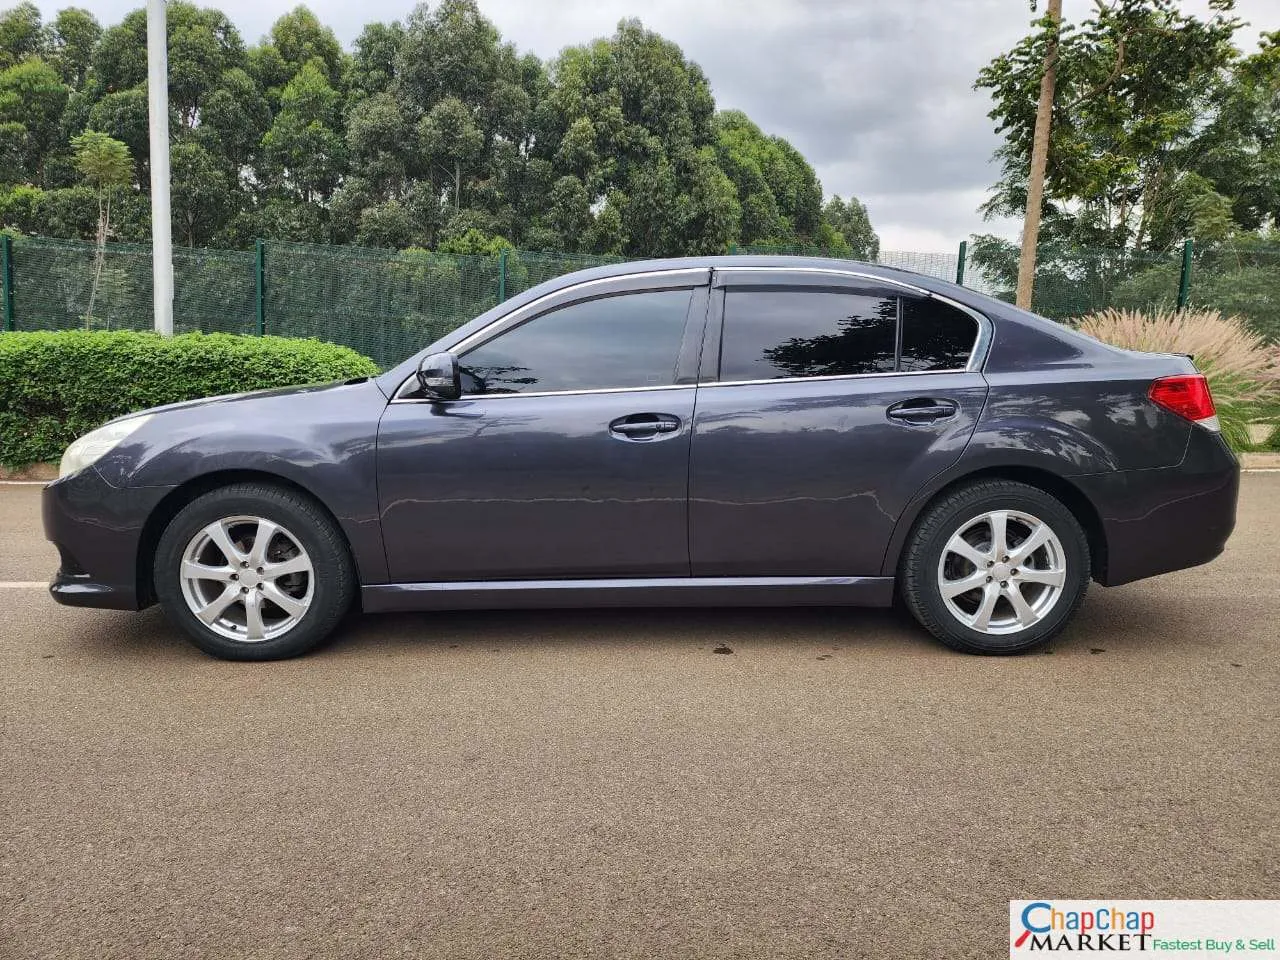 Cars Cars For Sale/Vehicles-Subaru legacy For sale in Kenya BM9 You pay 30% Deposit Trade in Ok EXCLUSIVE 9